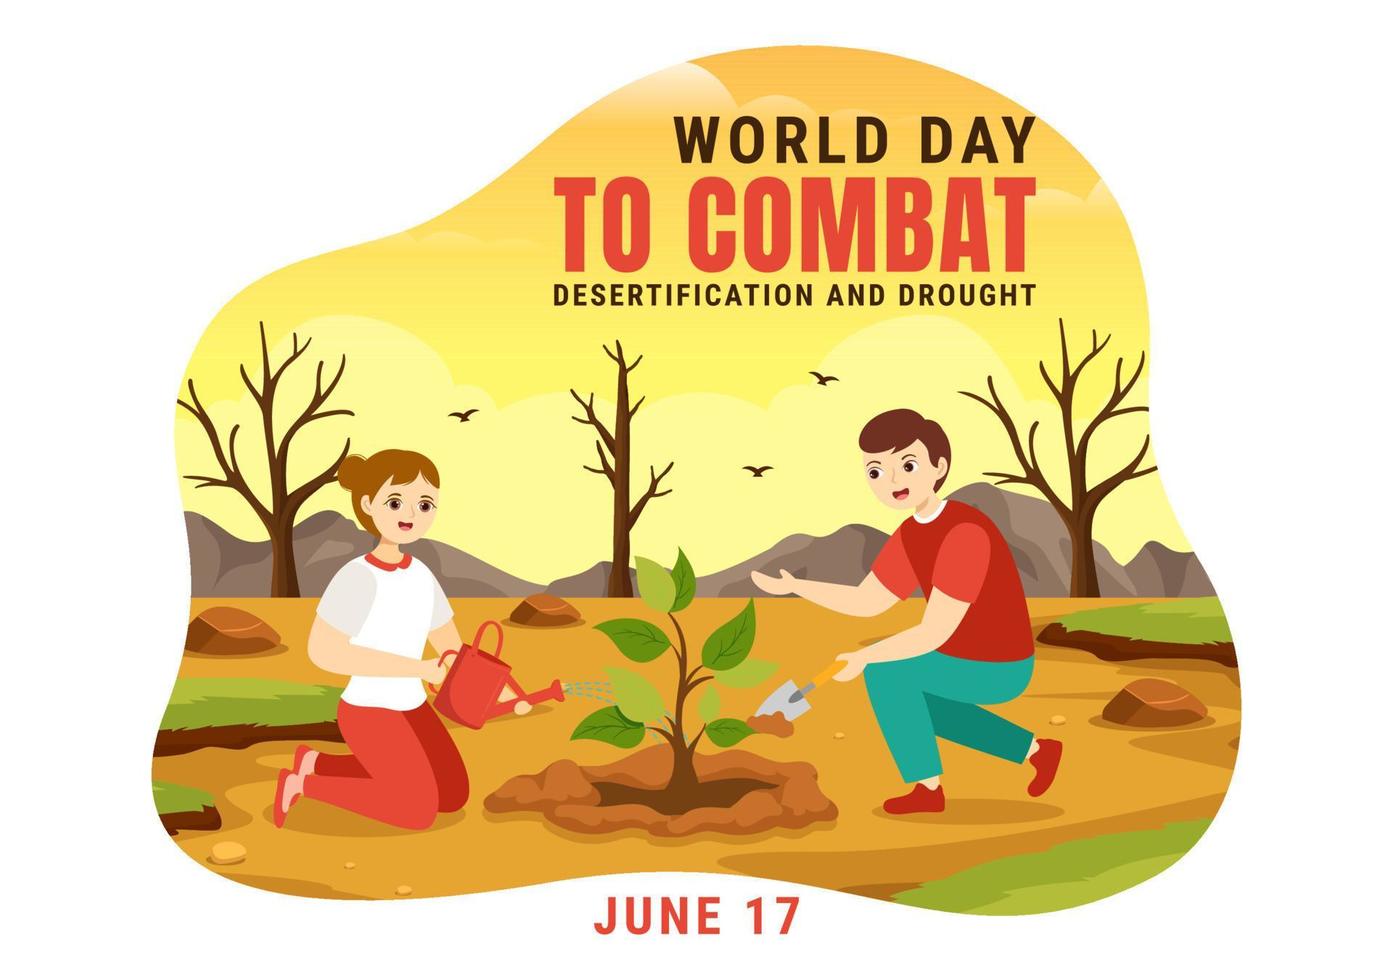 World Day to Combat Desertification and Drought Vector Illustration with Turning the Desert Into Fertile Land and Pastures in Hand Drawn Illustration